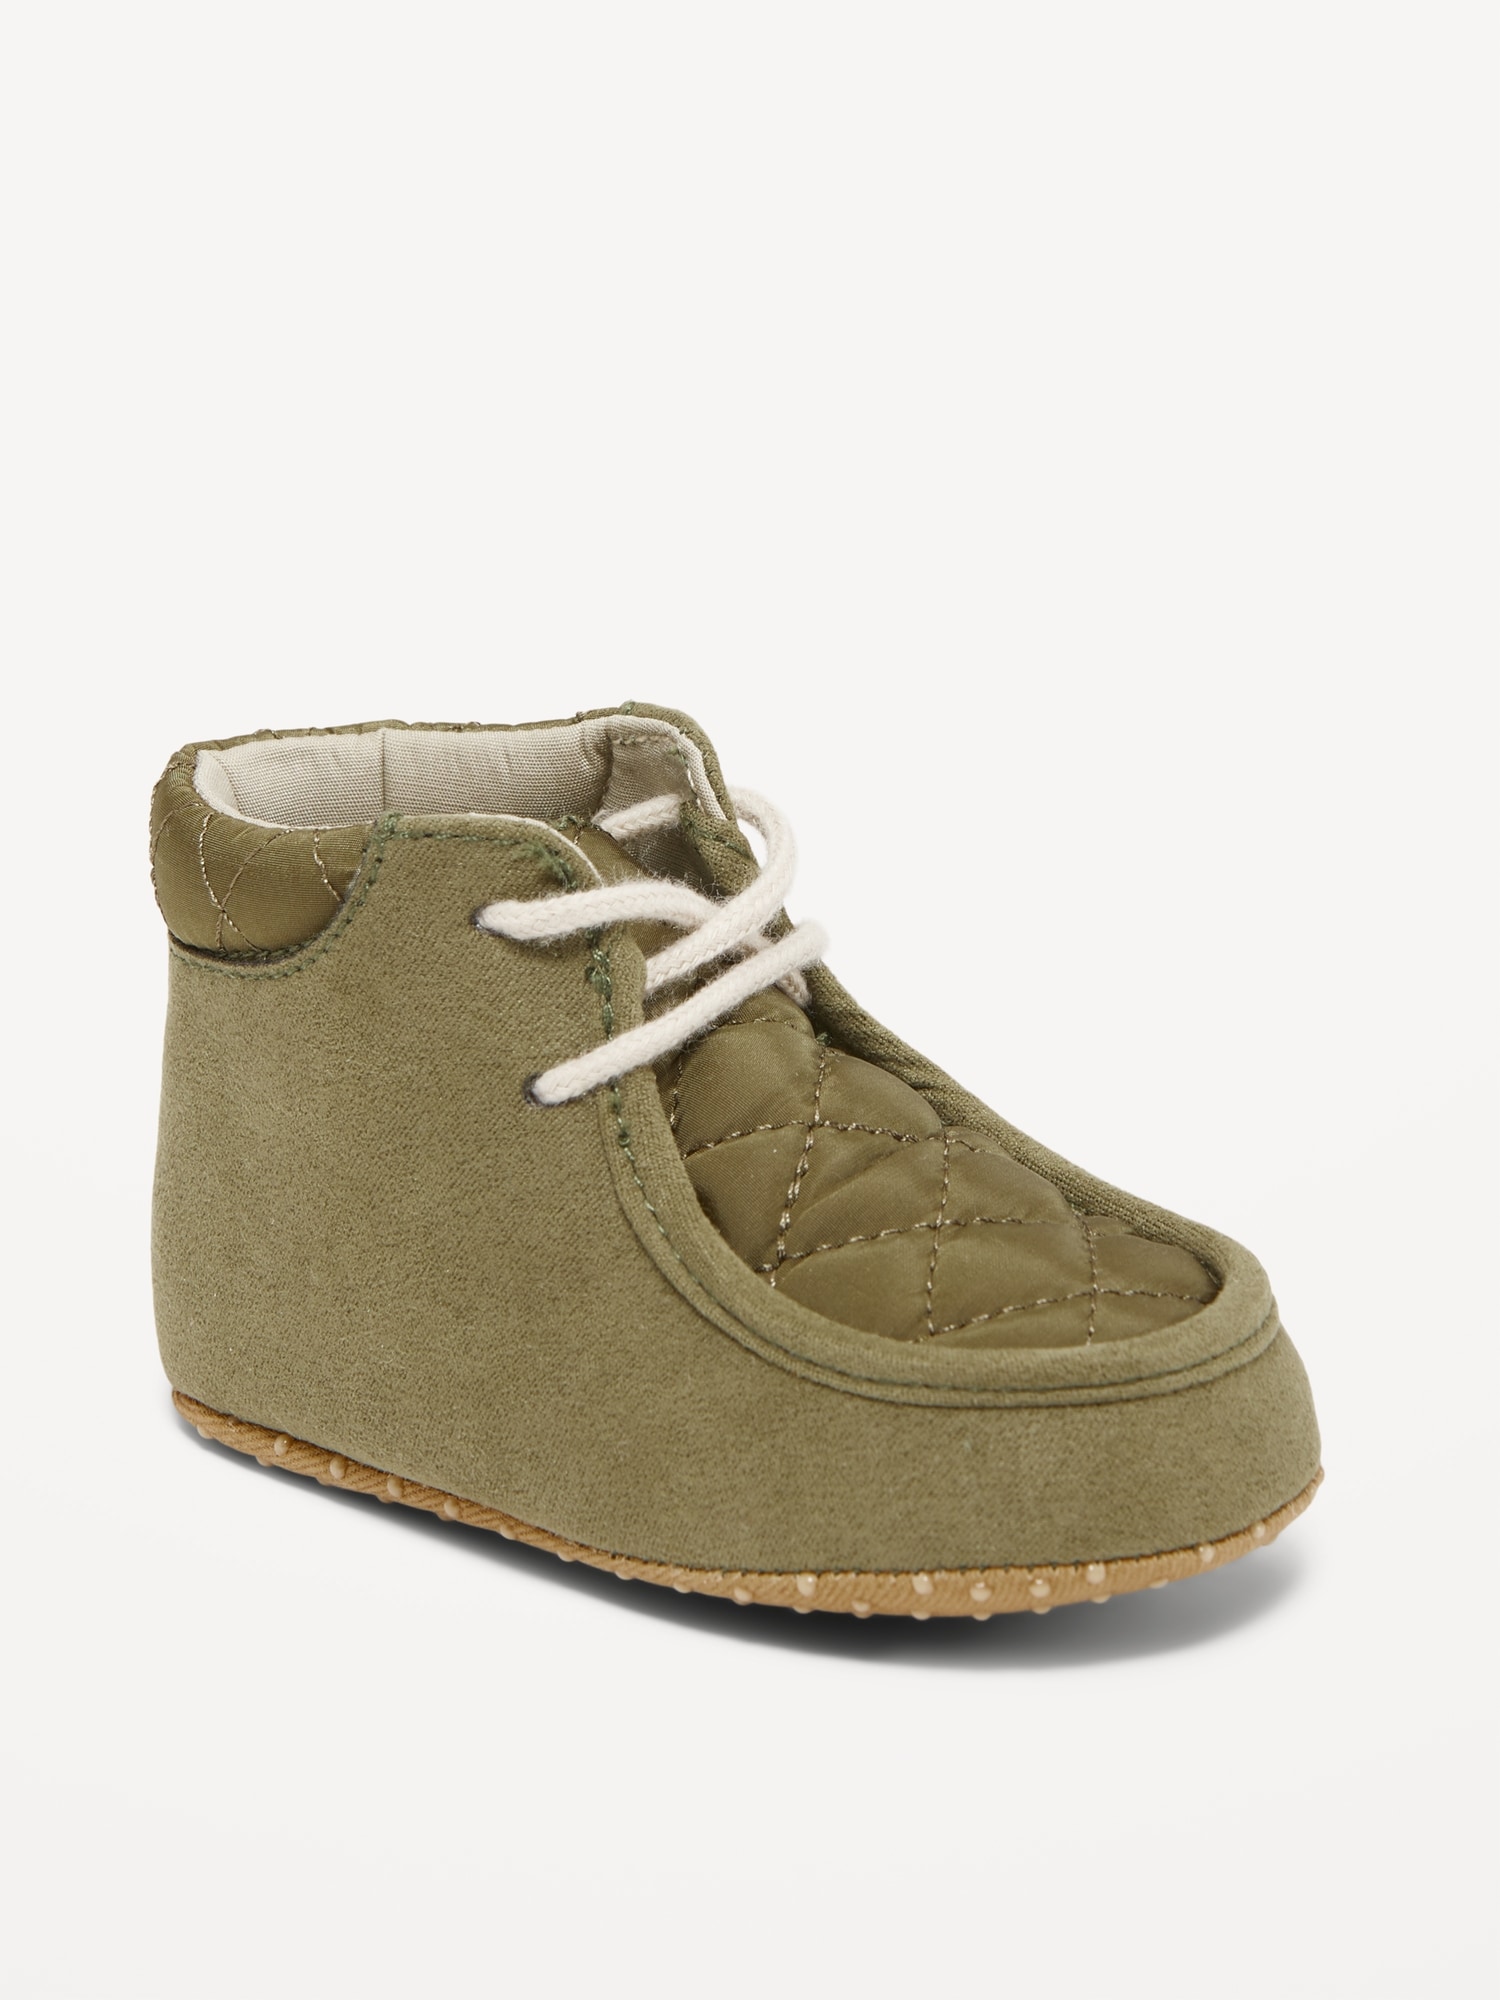 Unisex Faux-Suede Booties for Baby | Old Navy